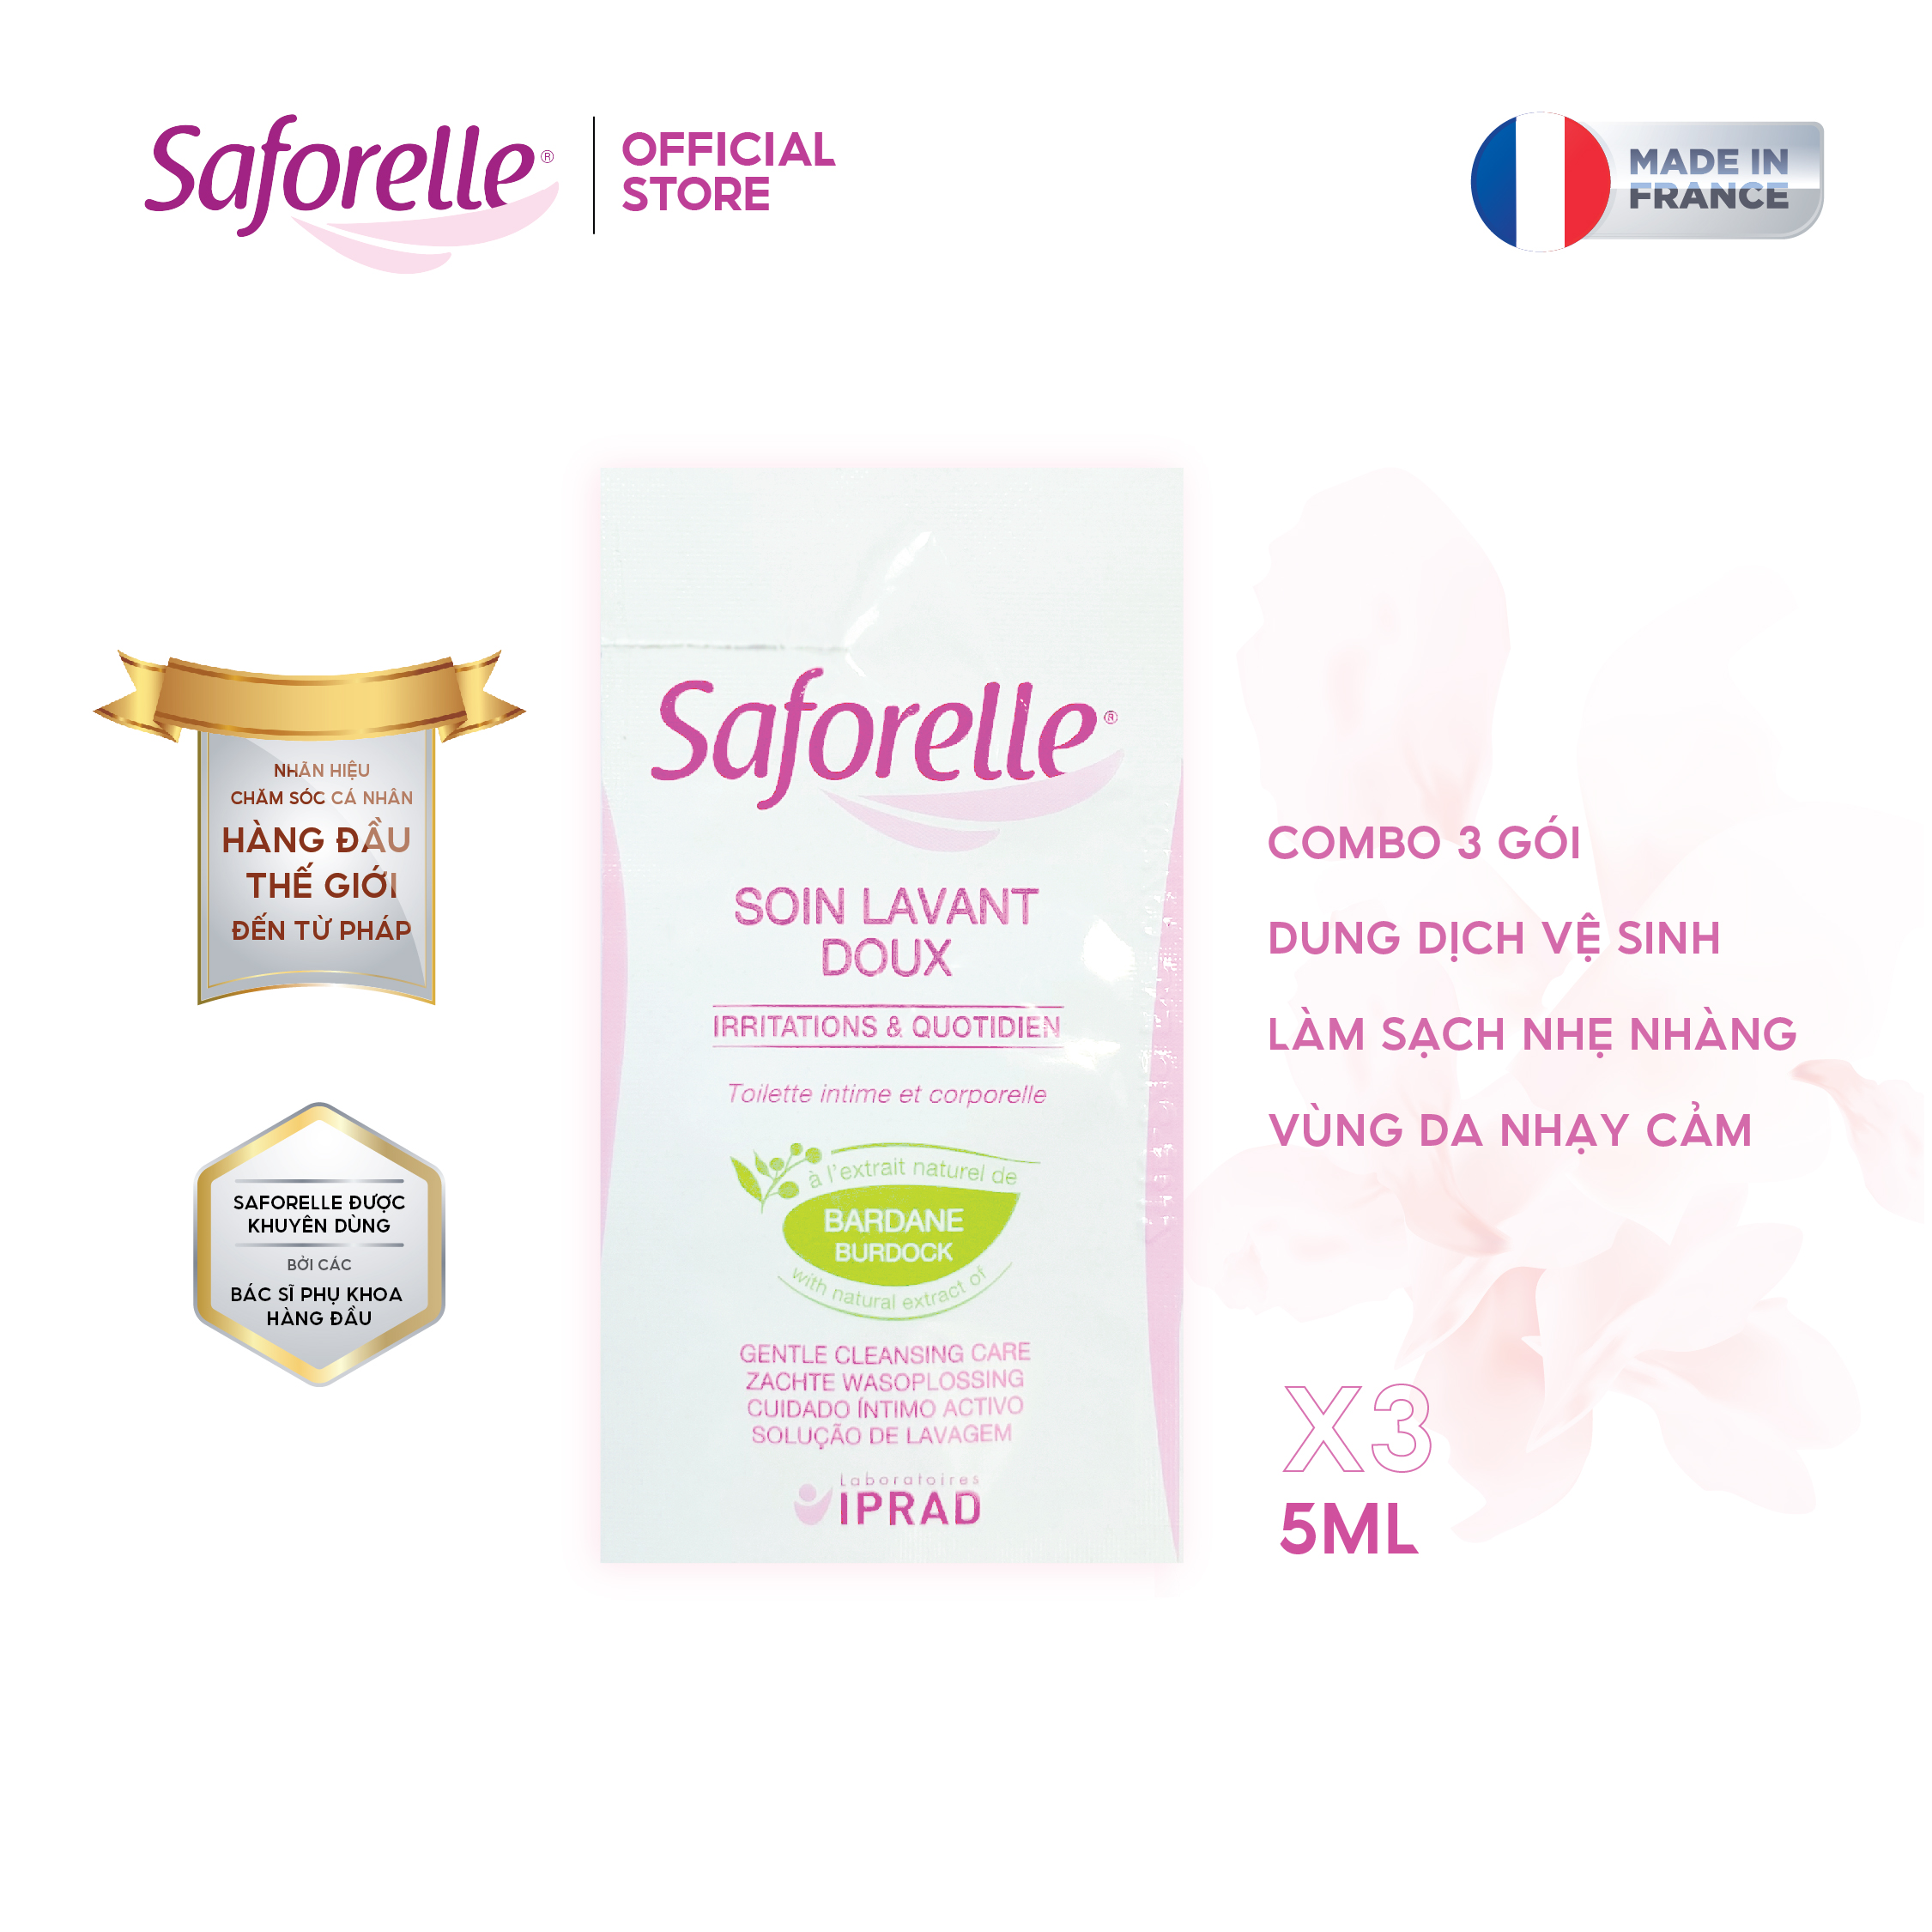 Dung dịch vệ sinh phụ nữ Saforelle Gentle Cleansing Care cao cấp làm sạch